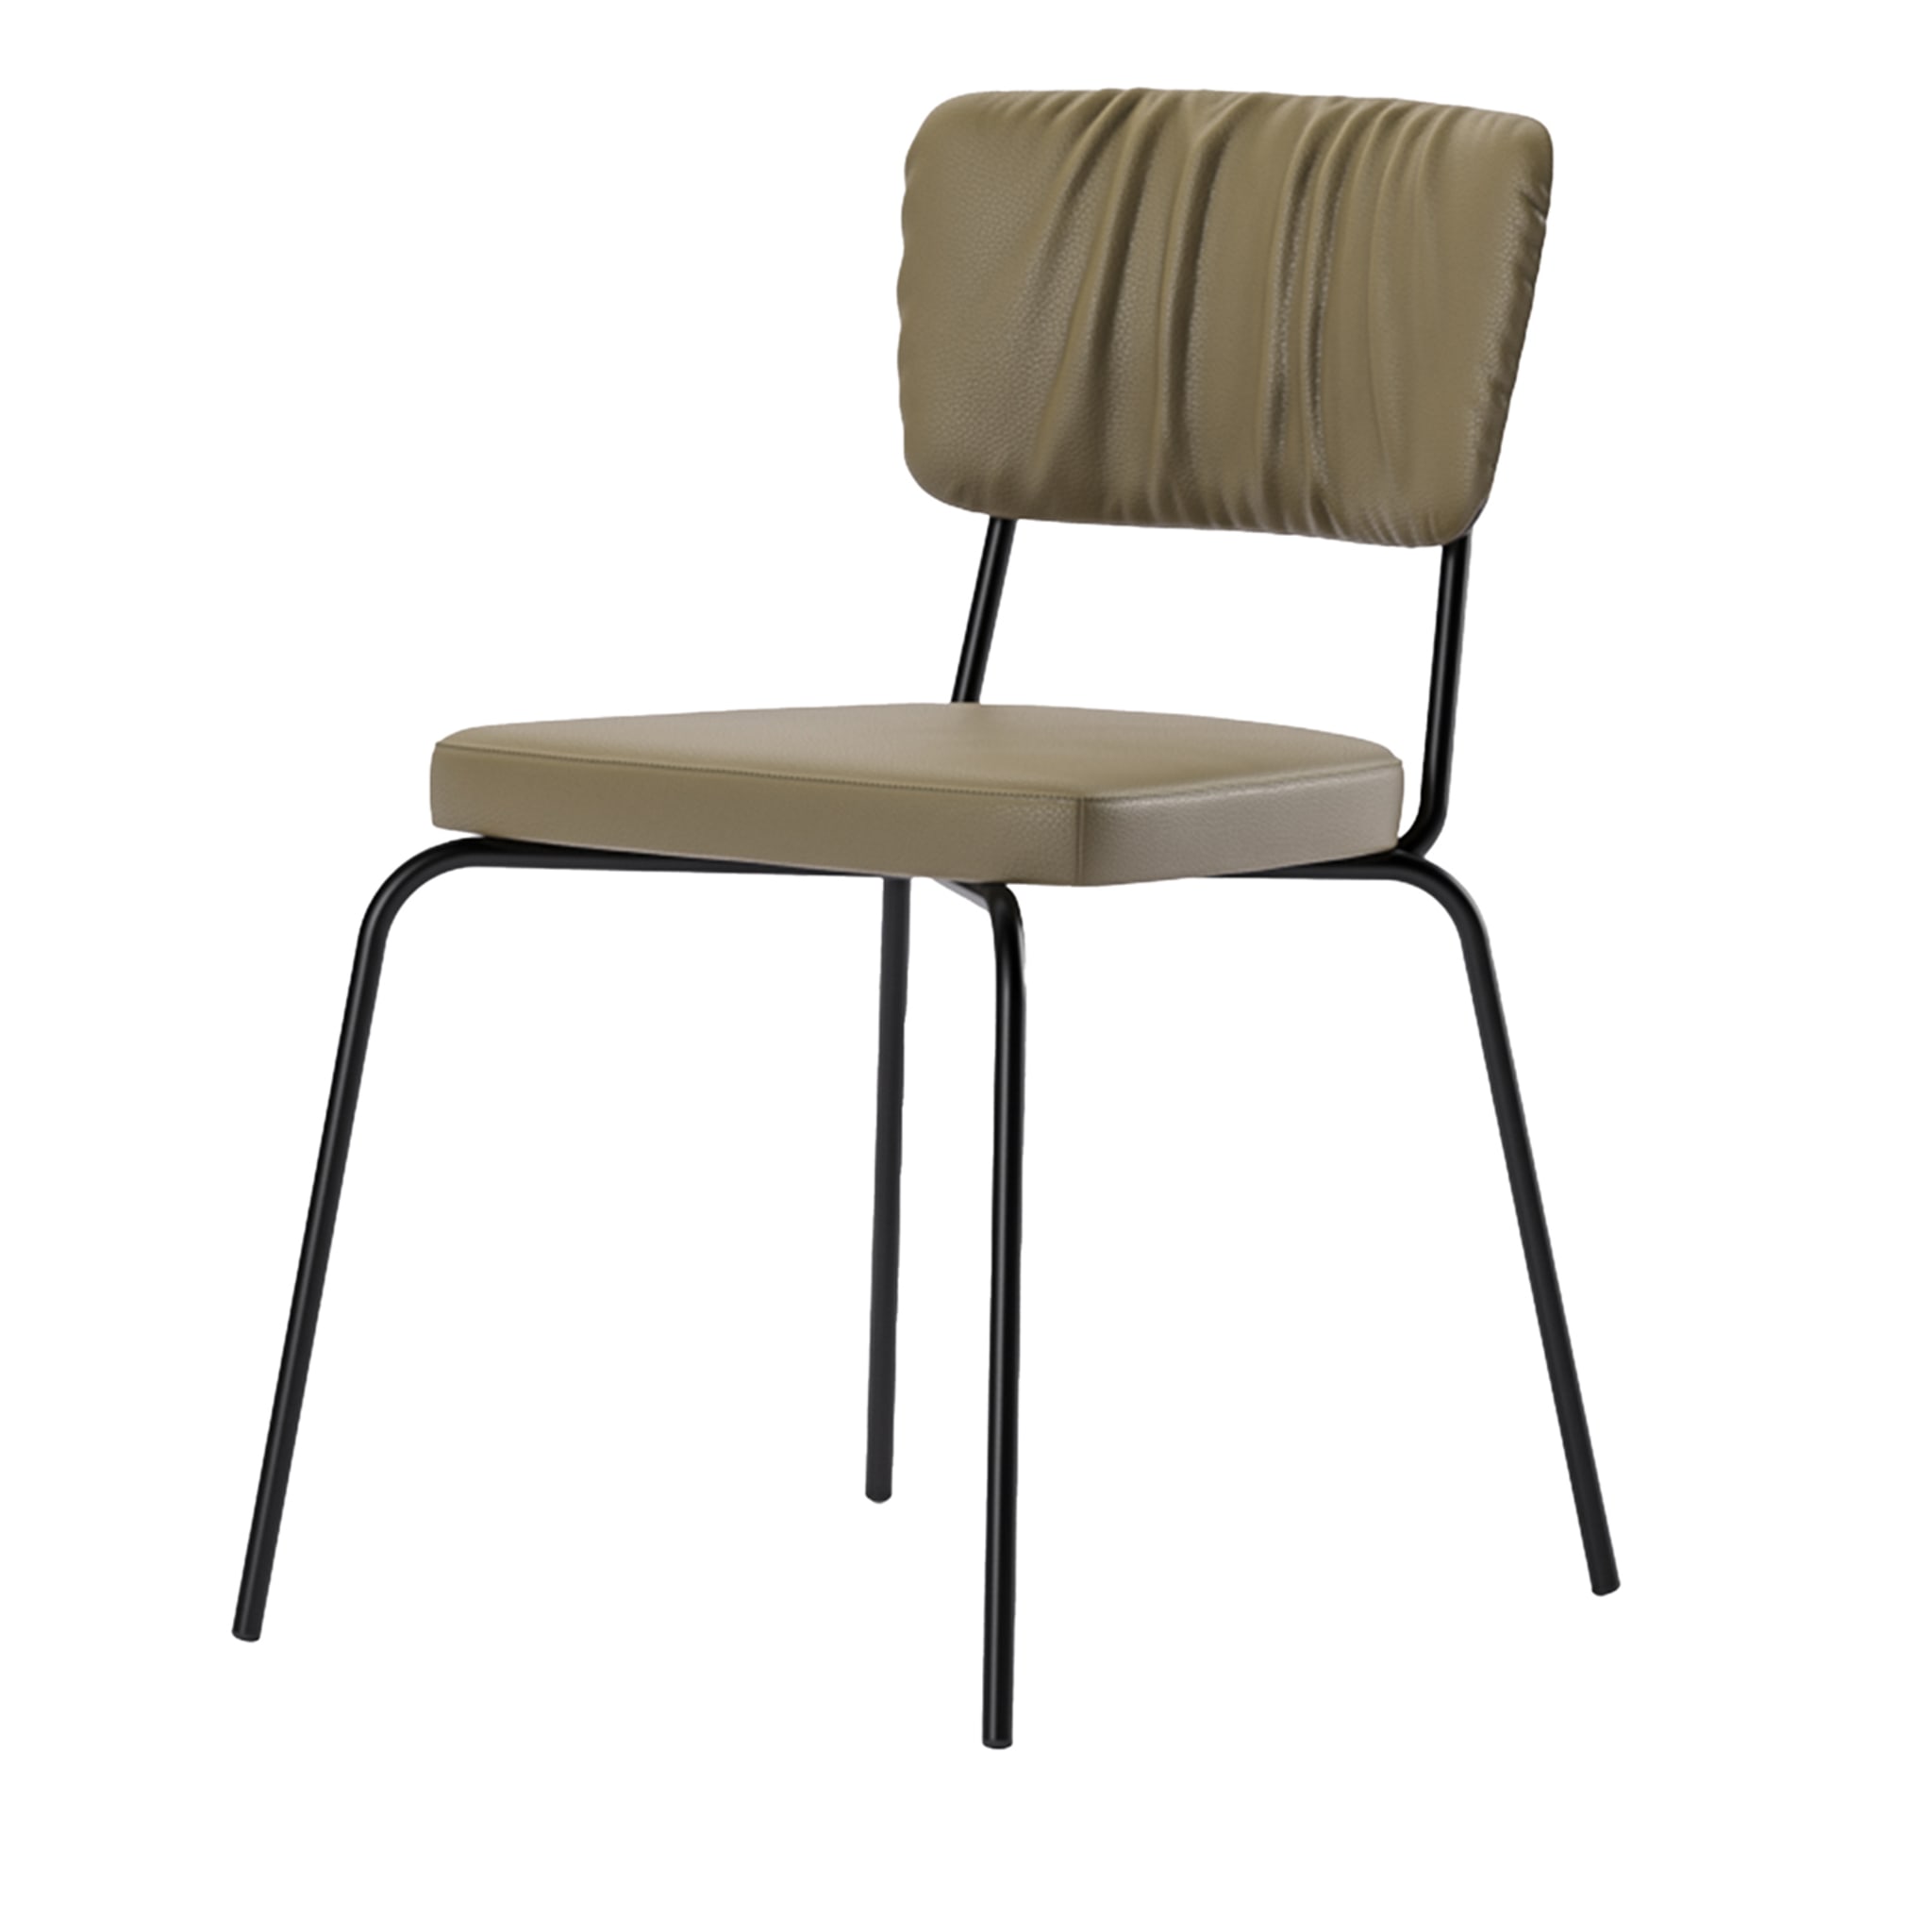 Scala Black Padded Chair by Marco Piva - Main view